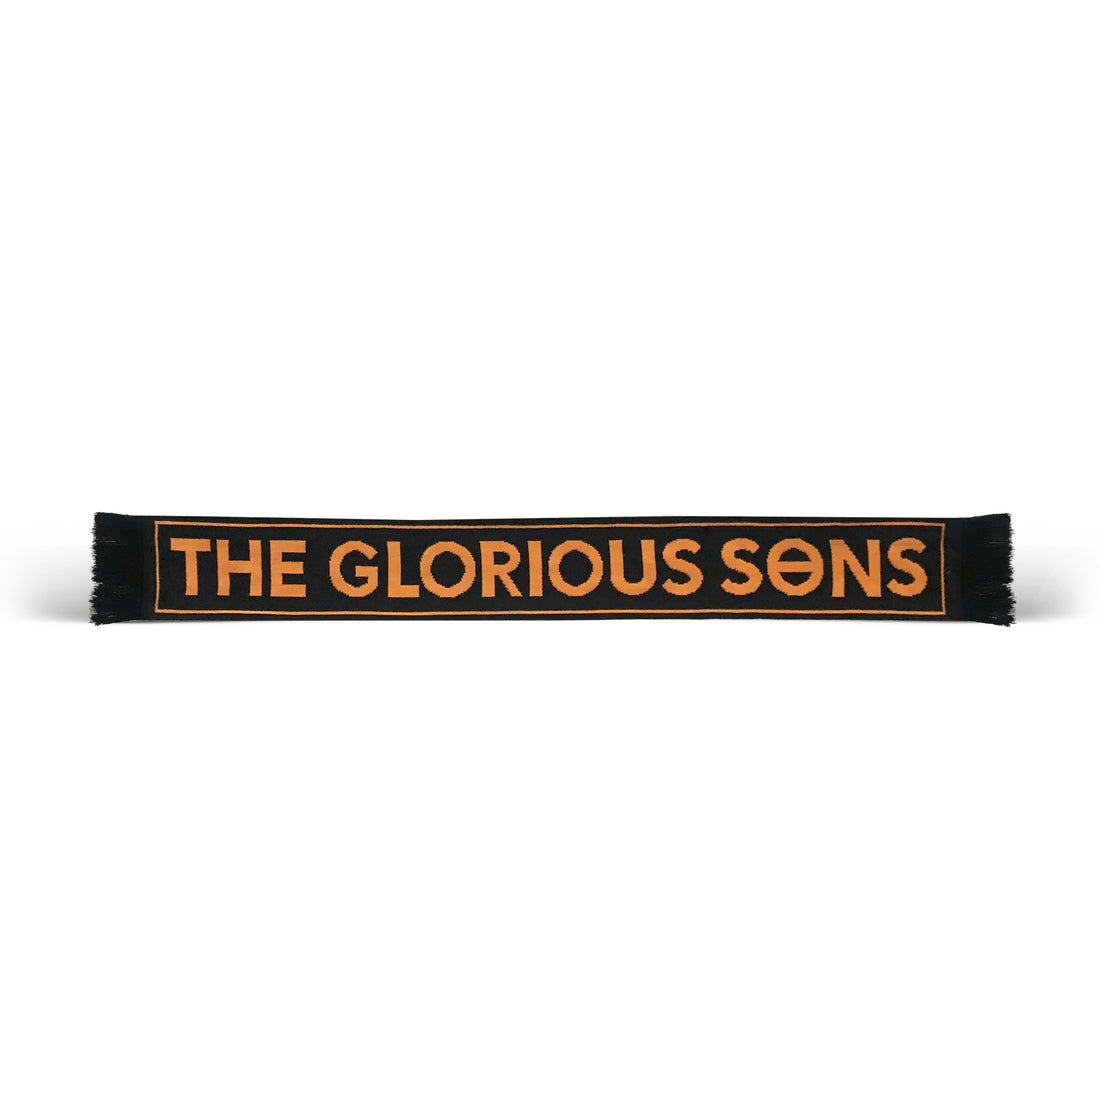 The Glorious Sons - Custom Knit Scarf